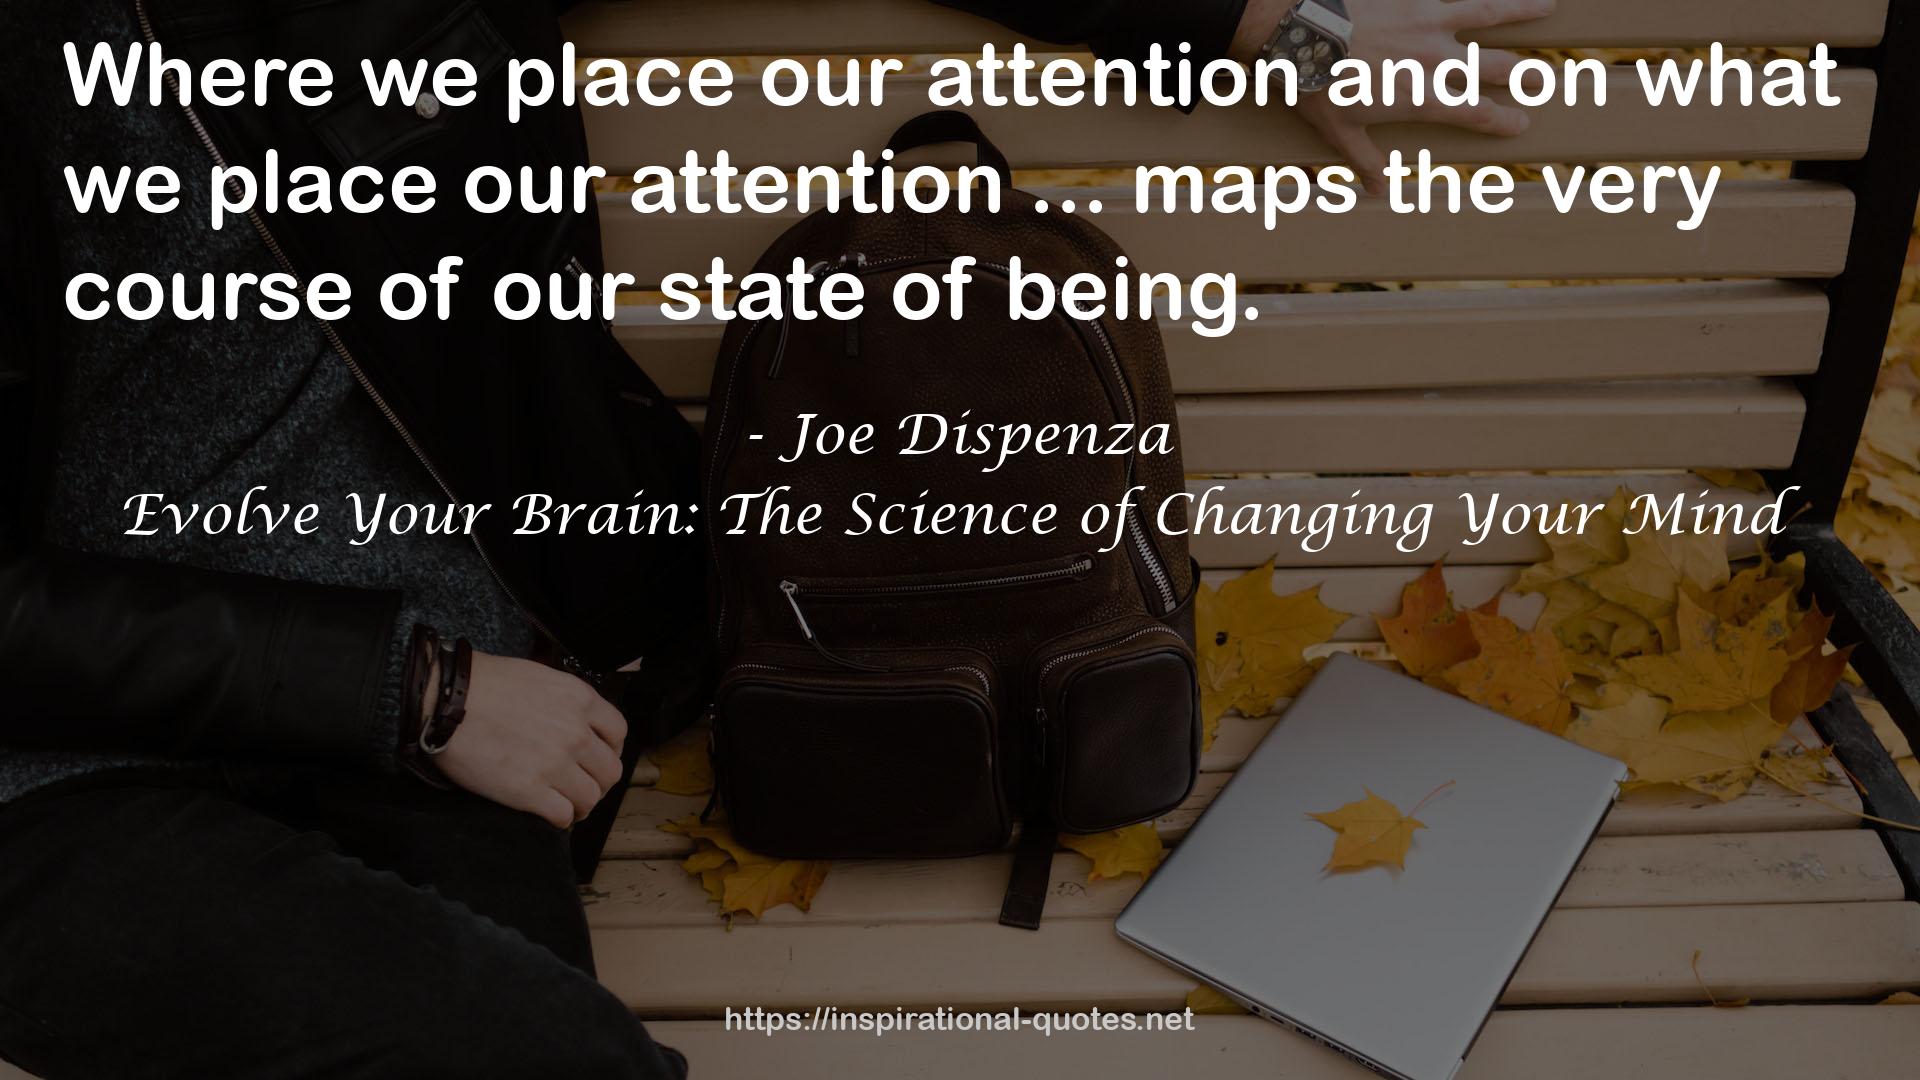 Evolve Your Brain: The Science of Changing Your Mind QUOTES